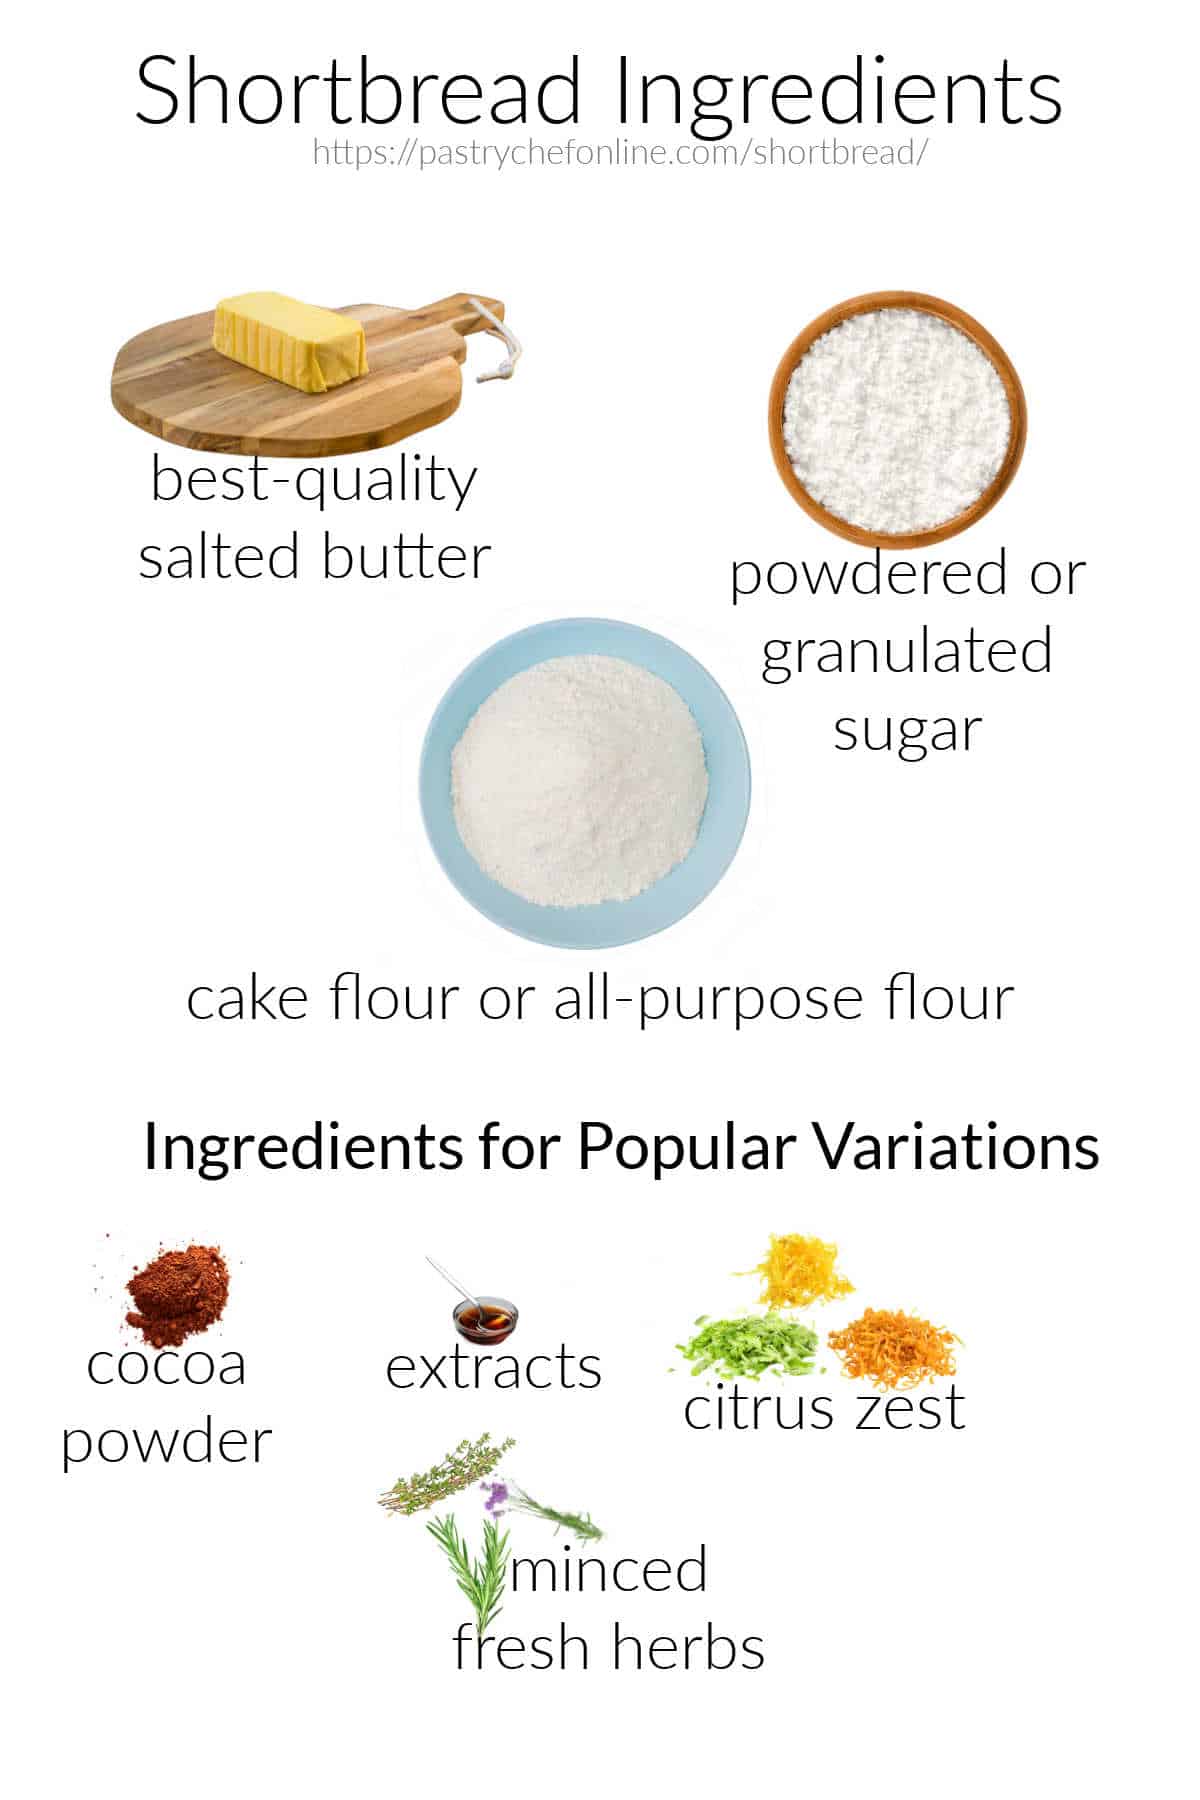 Labeled images of the ingredients for making basic shortbread plus optional ingredients to make different flavors.